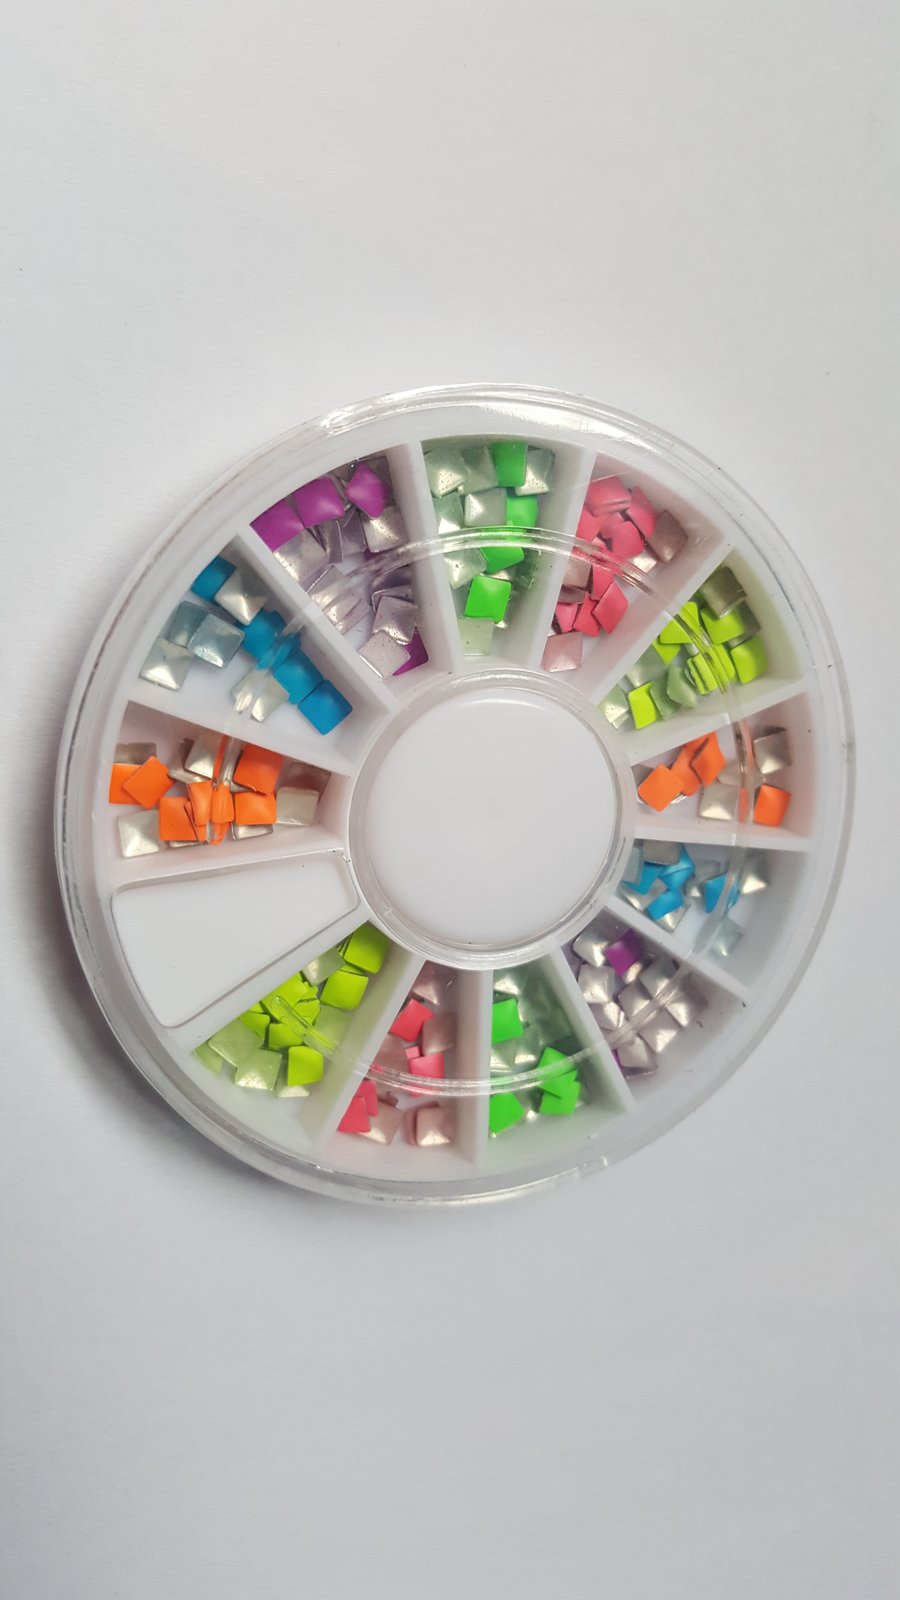 1 x Filled Storage Wheel - 6cm - 3mm Square Studs - Mixed Colour 